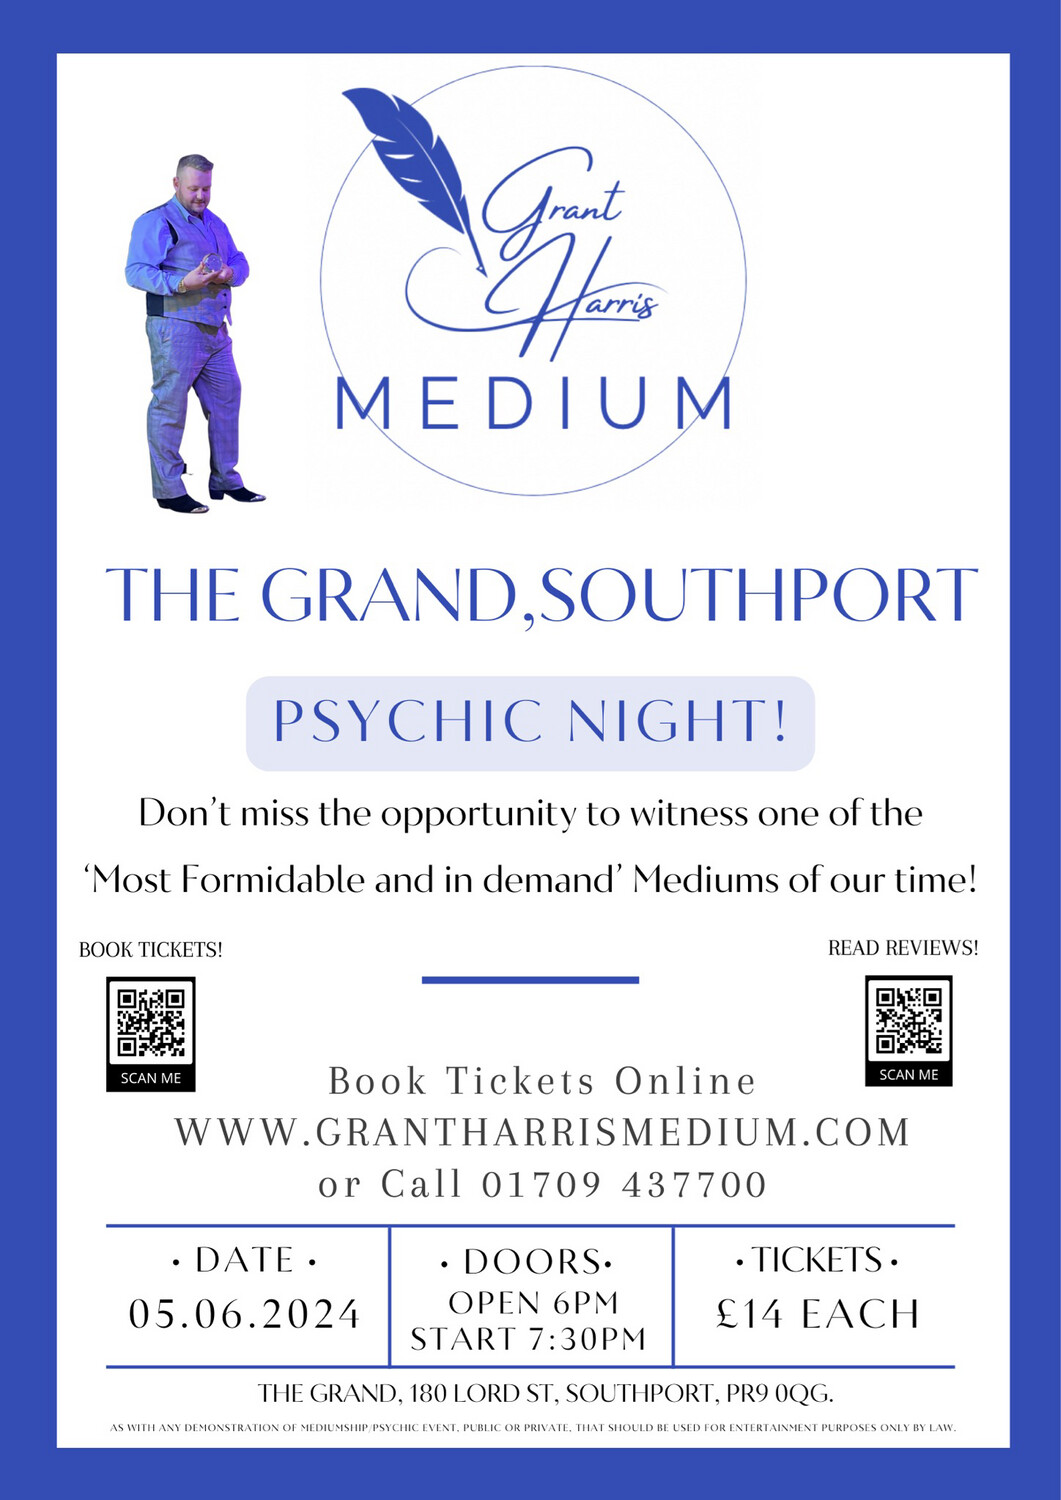 Psychic Night | The Grand, Southport, Wed 5th June 2024